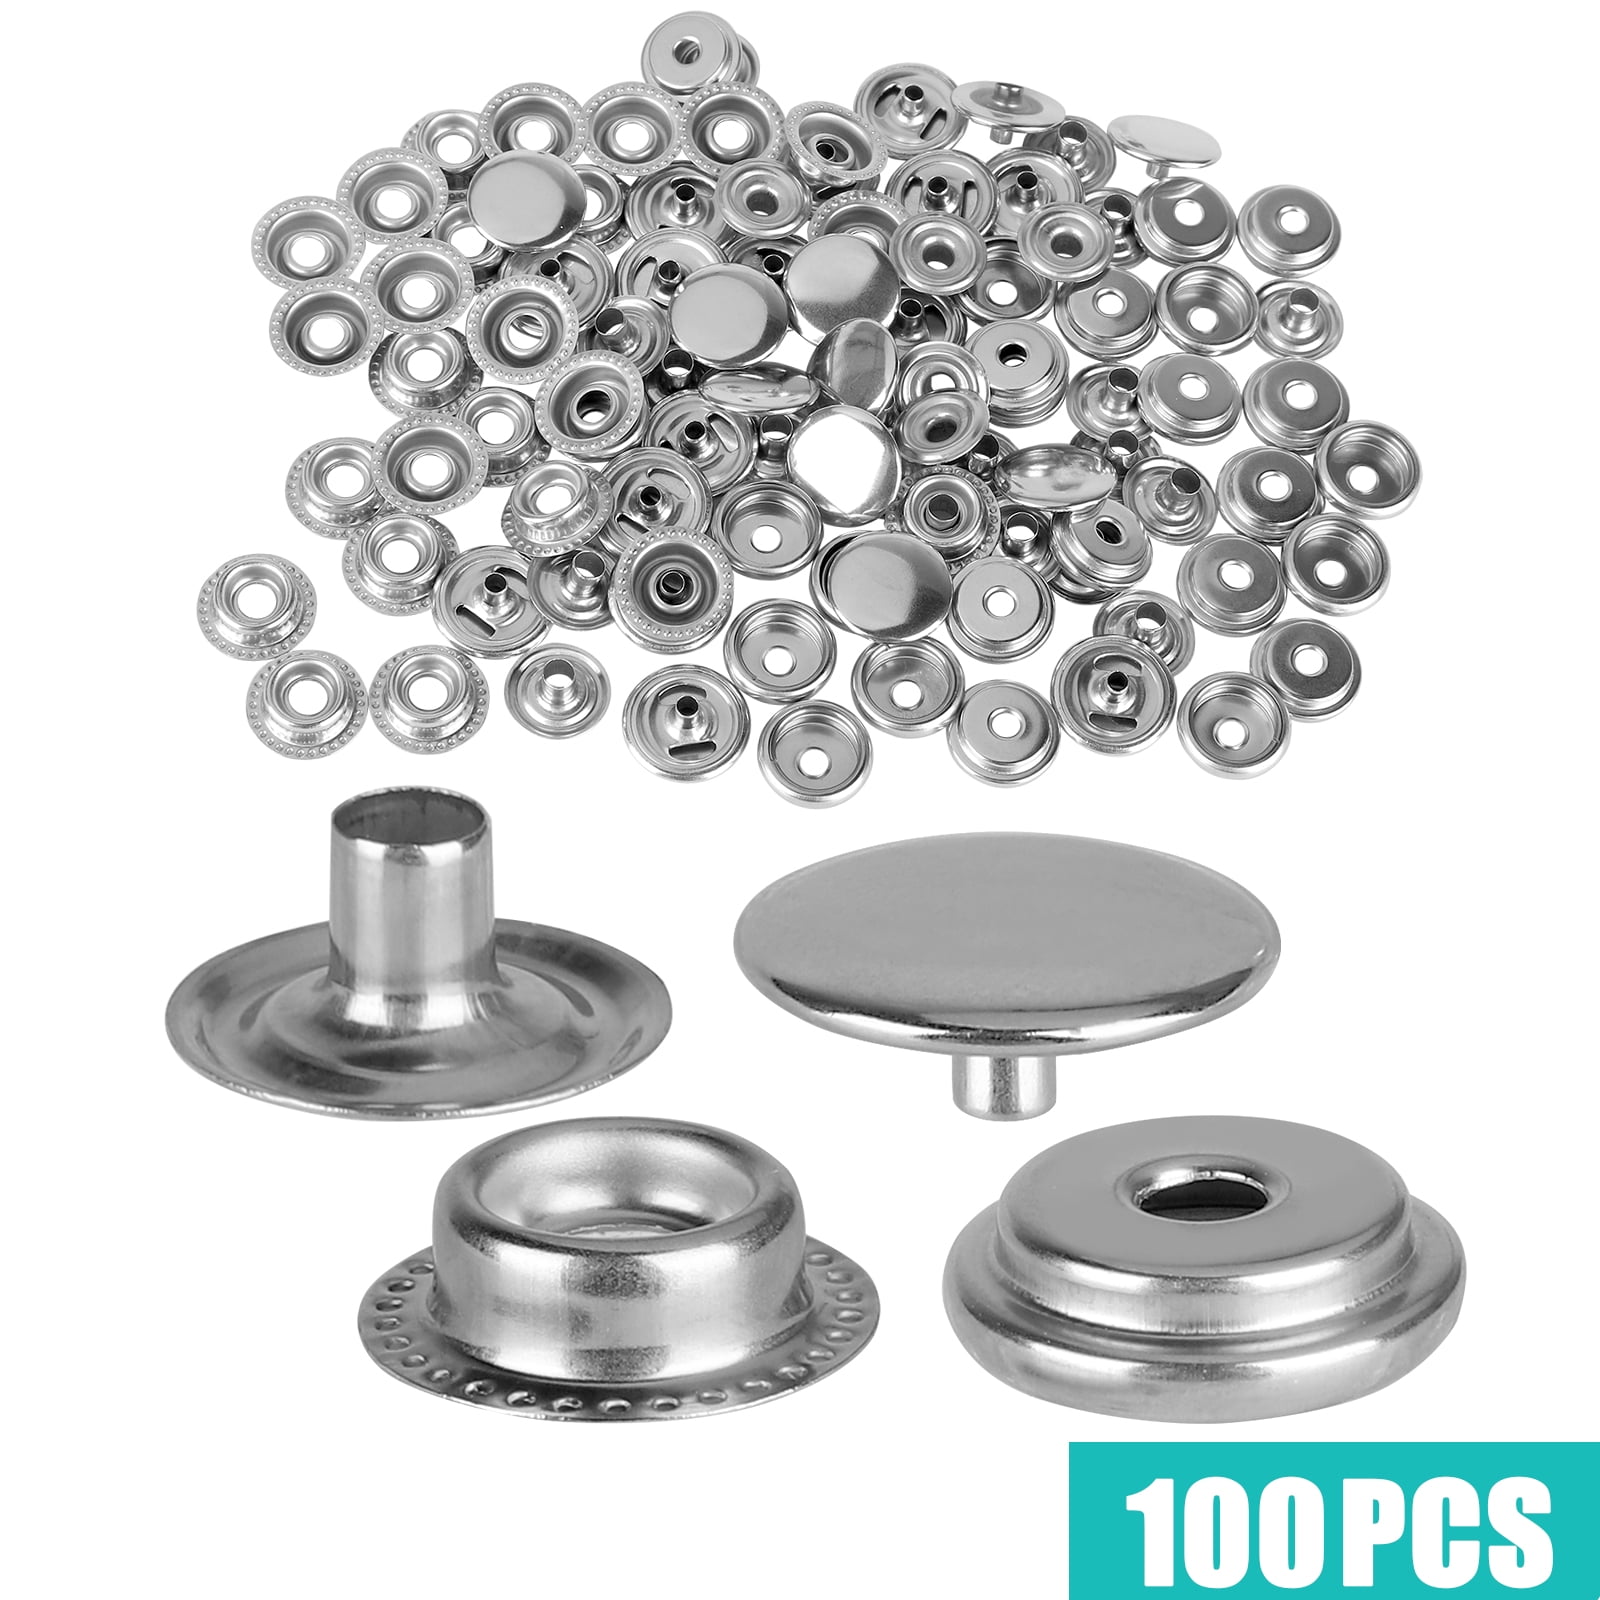 100pcs 15MM Stainless Steel Fasteners Tool Stud Button DIY Leather Craft Useful 